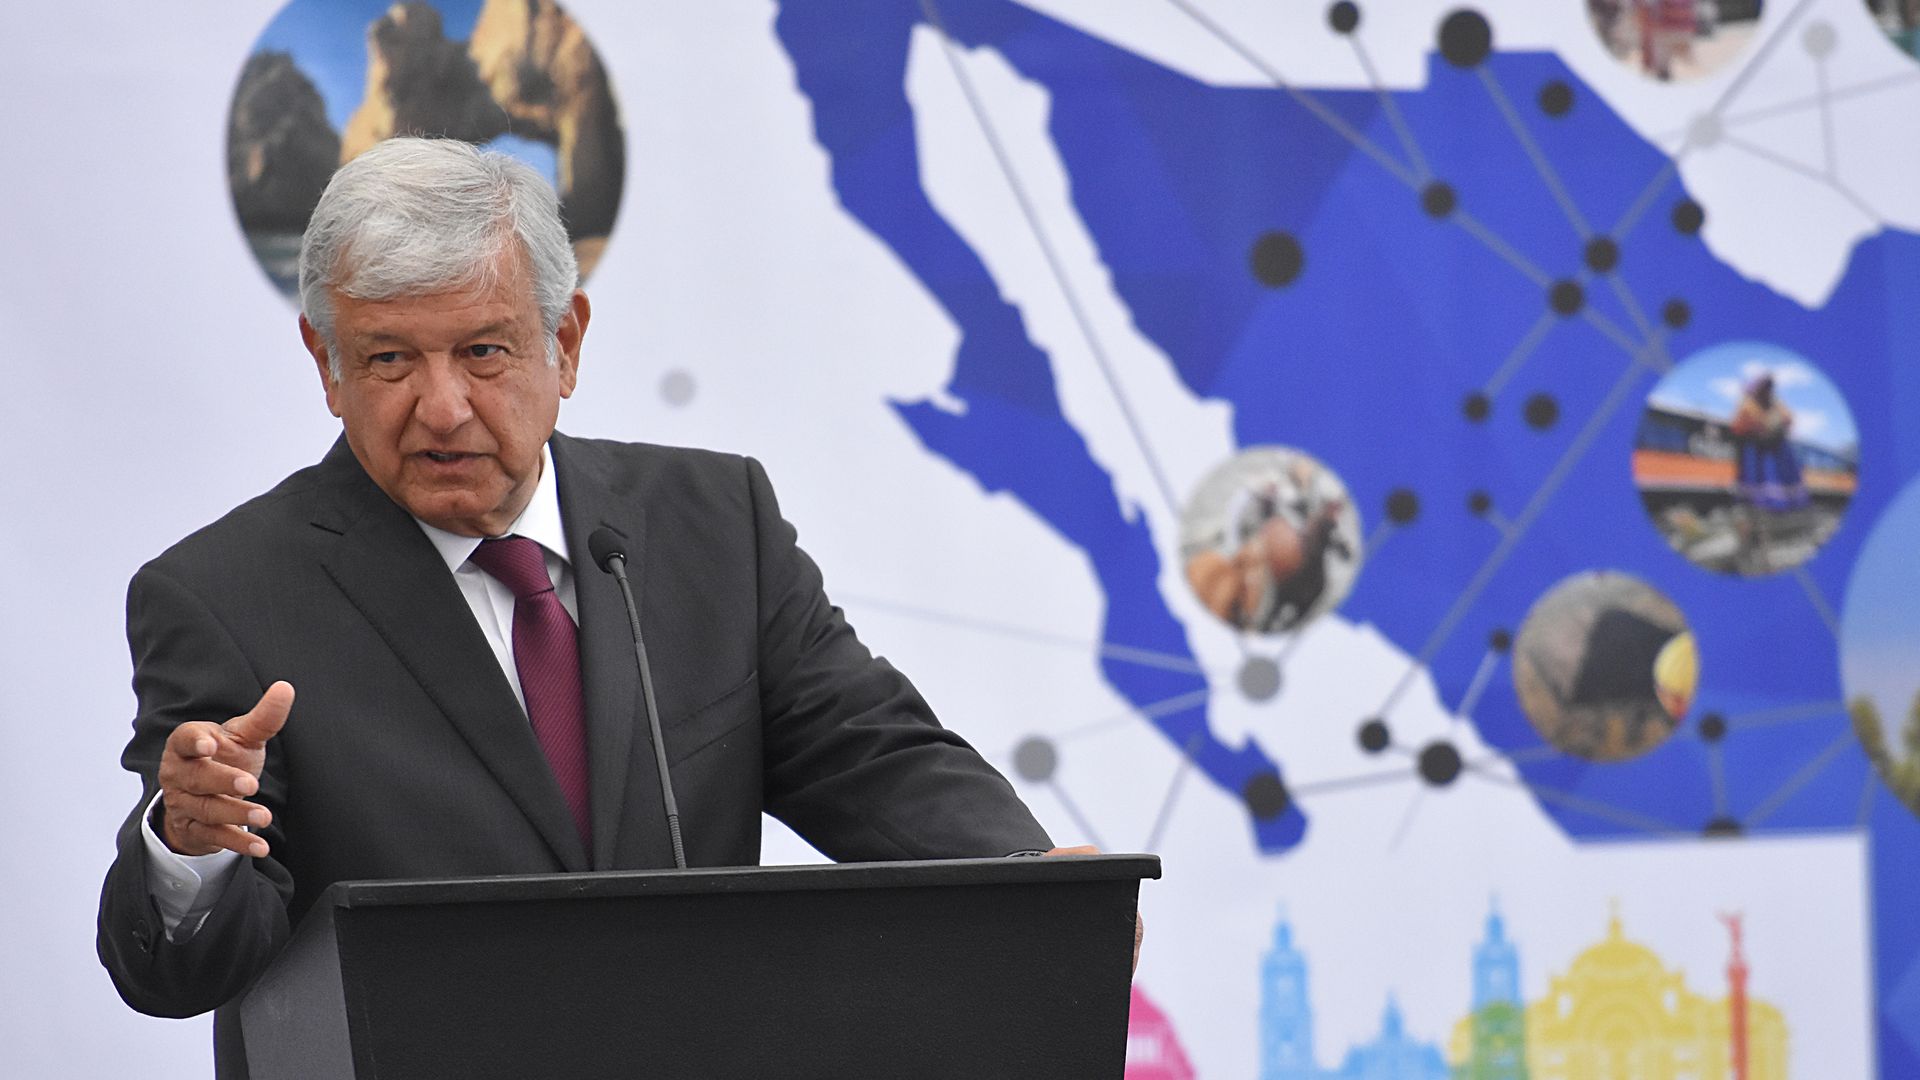 Andres Manuel Lopez Obrador presidential candidate of Mexico talks during the XVI edition of the National Forum of Tourism at Chapultepec Castle on May 07, 2018 in Mexico City, Mexico. 